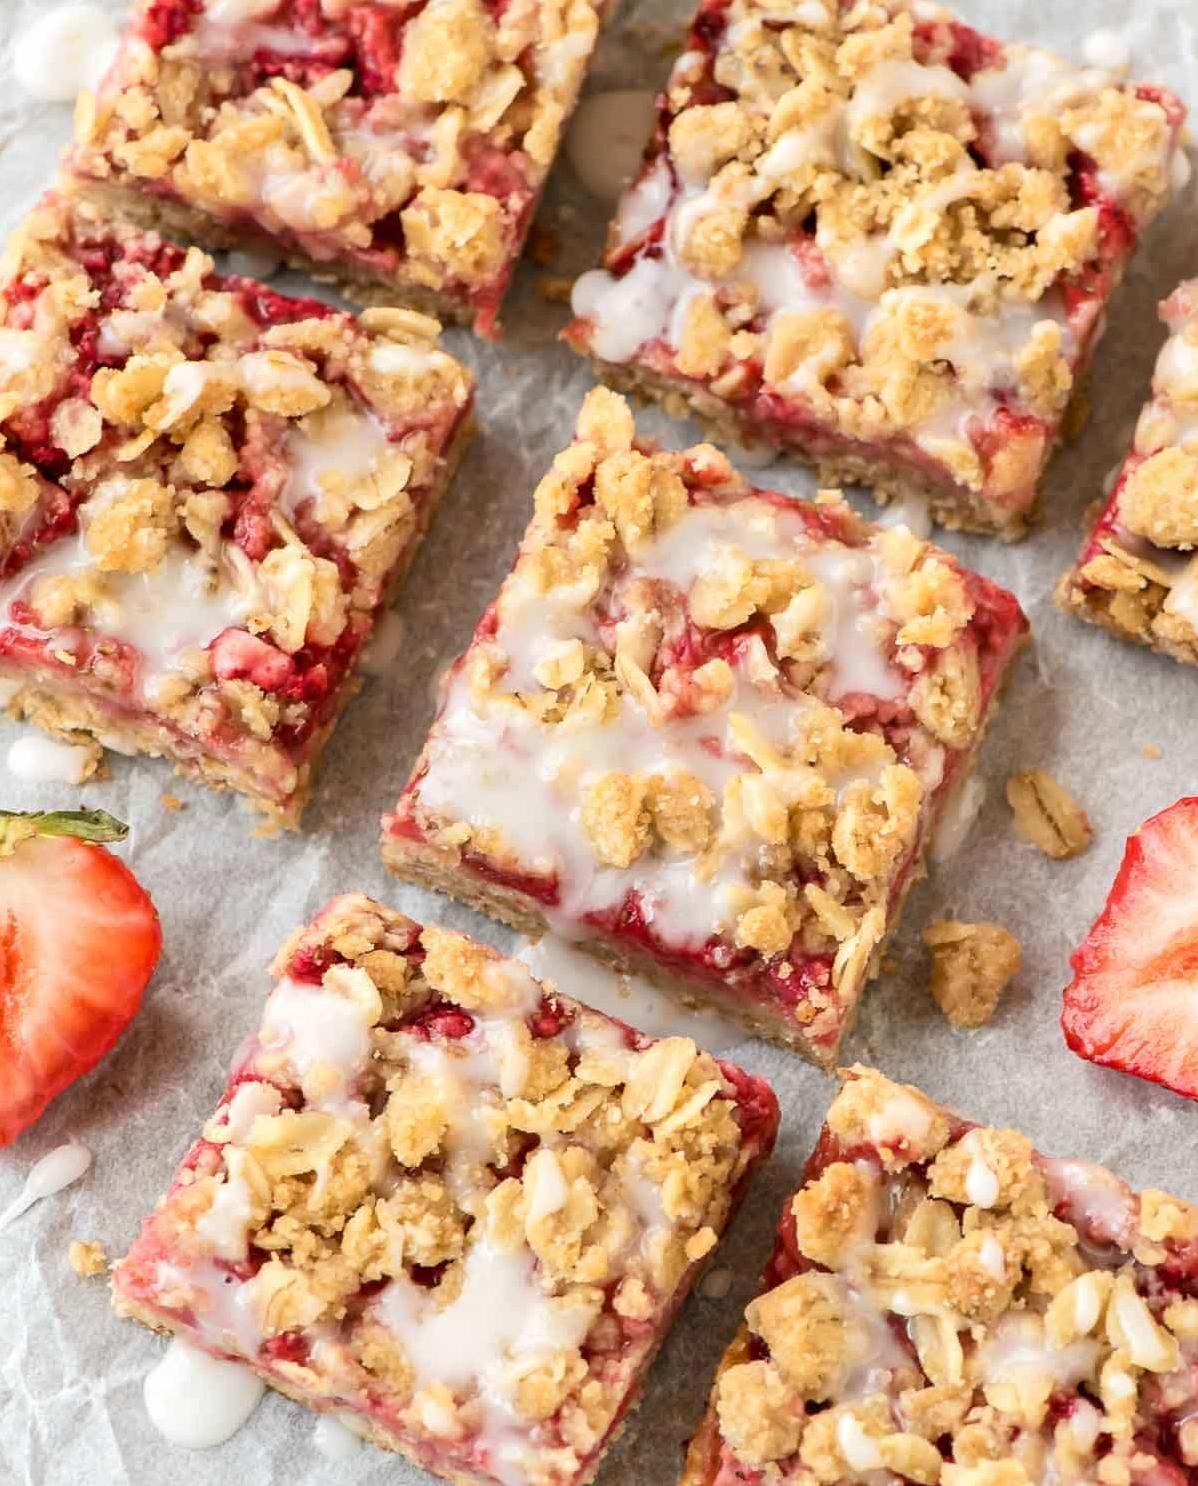  No need to sacrifice taste for health - these bars have both!